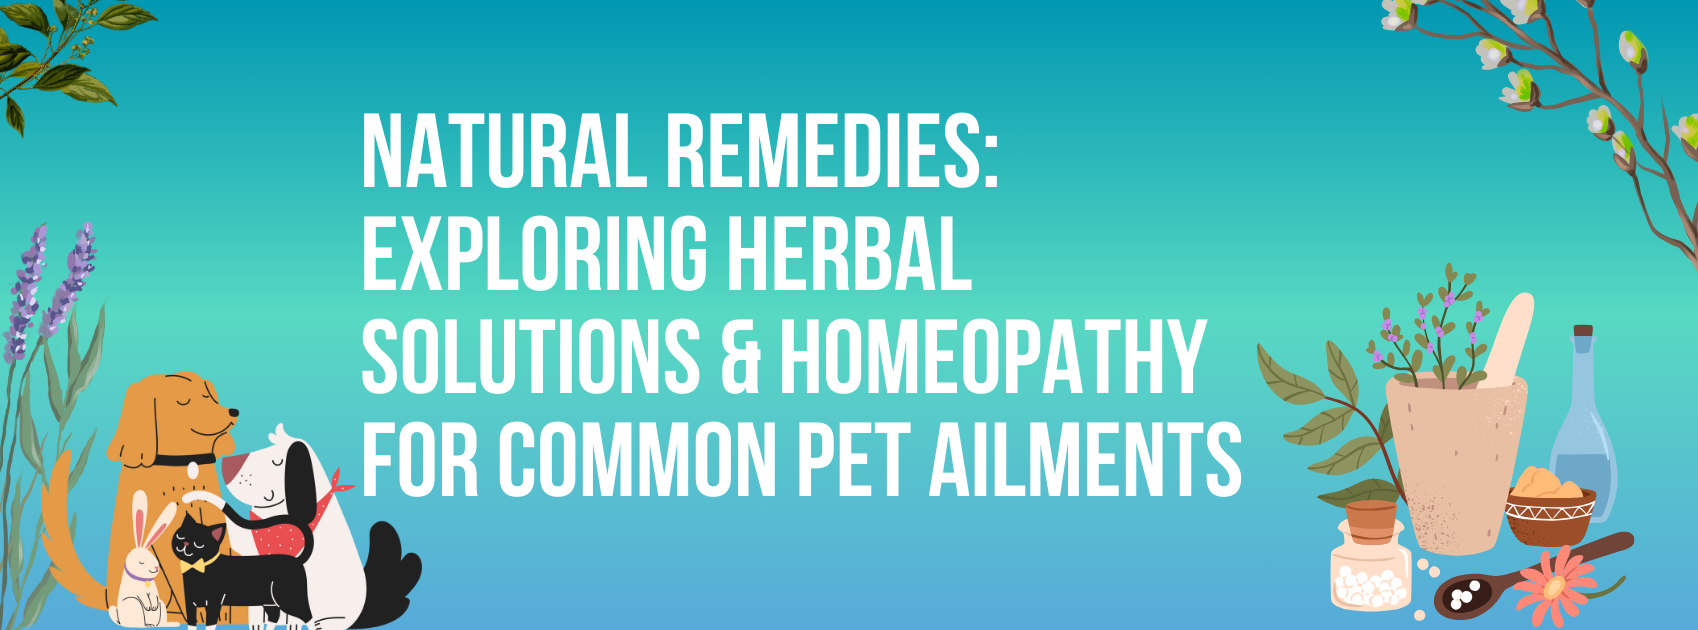 Natural Remedies: Exploring Herbal Solutions & Homeopathy for Common Pet Ailments